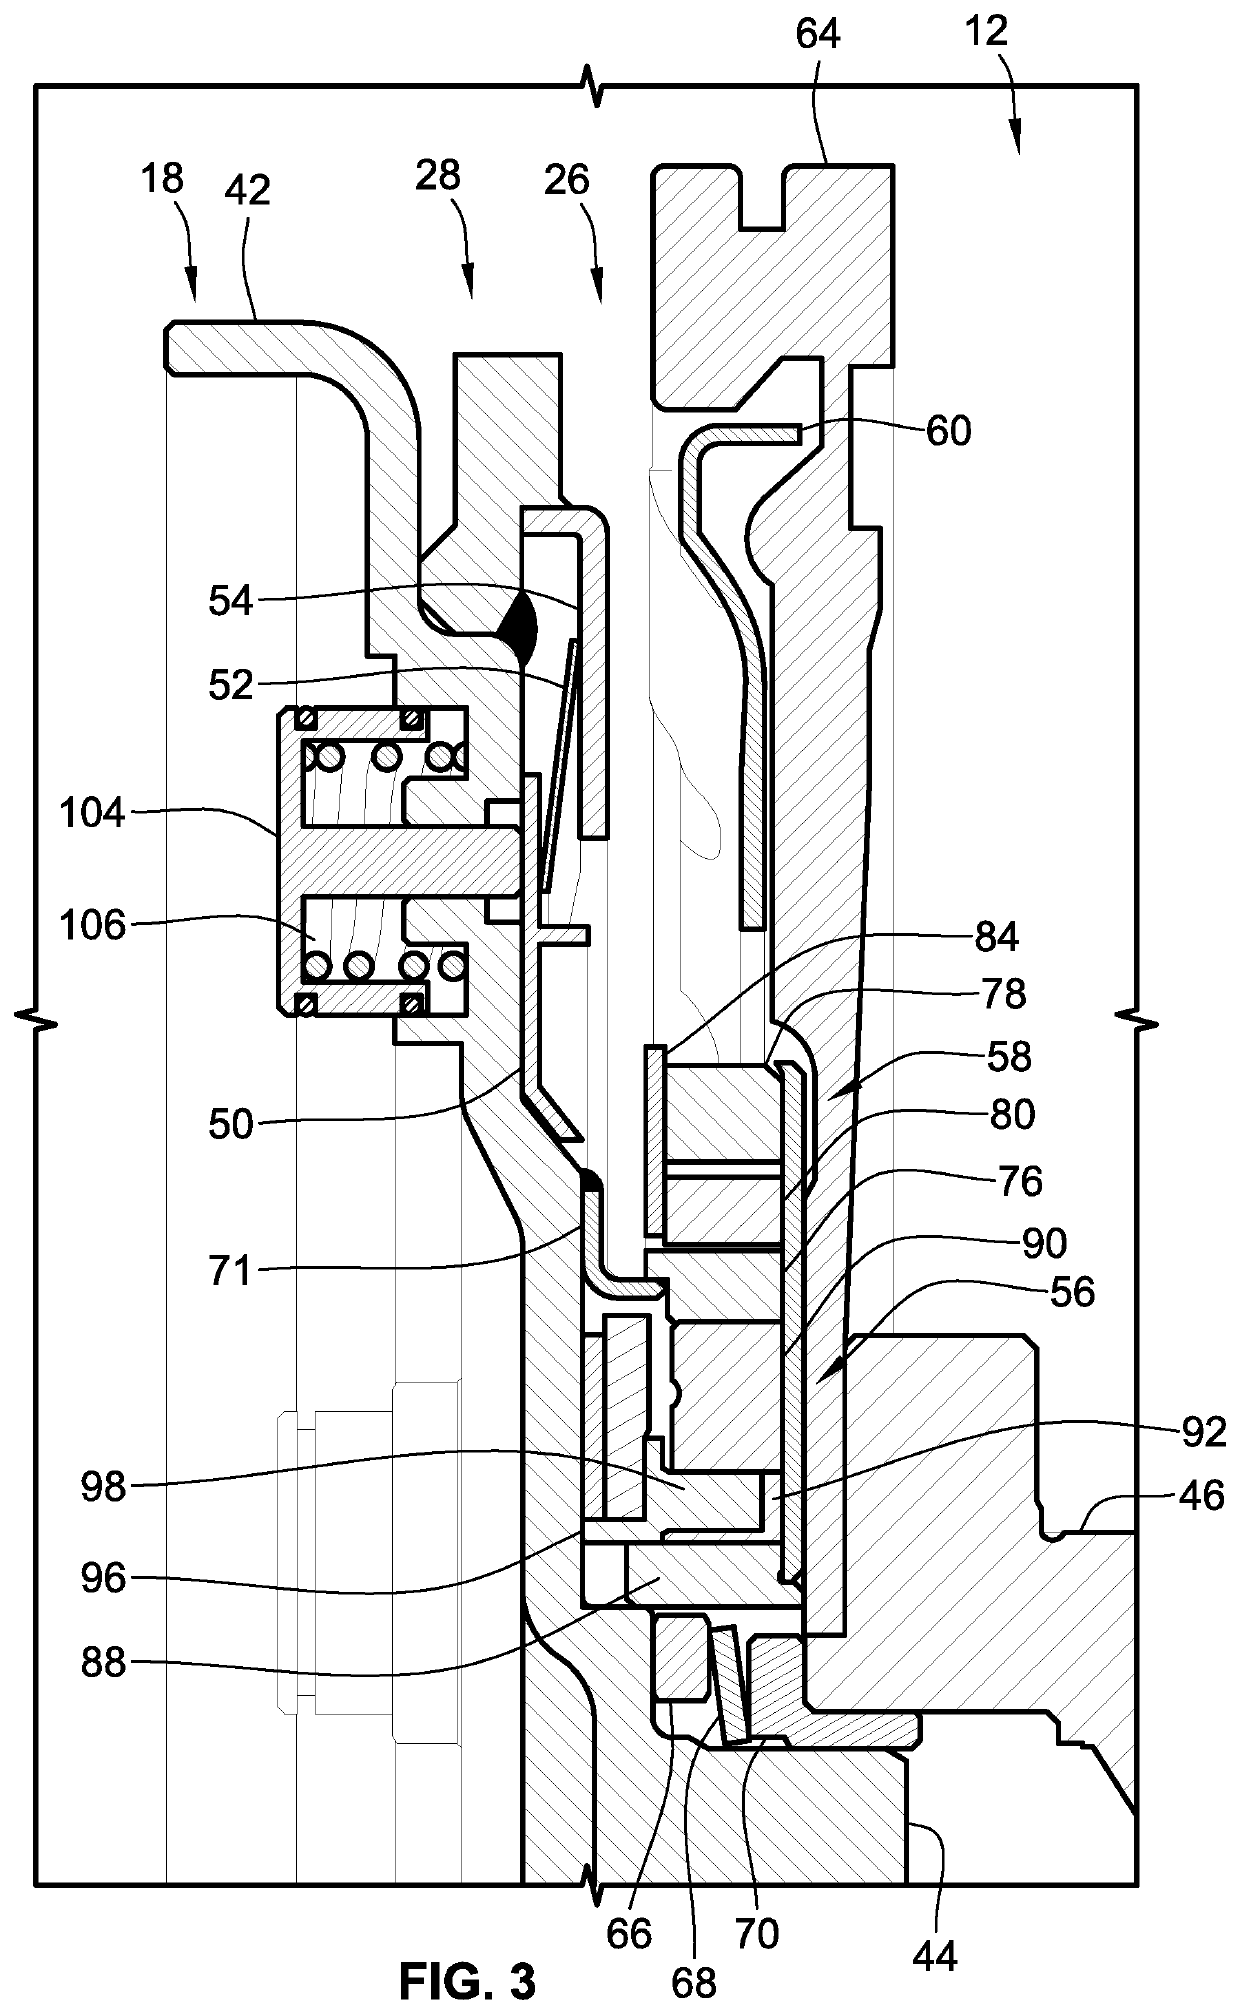 Wedge-type selectable one-way clutches for engine disconnect devices of motor vehicle powertrains